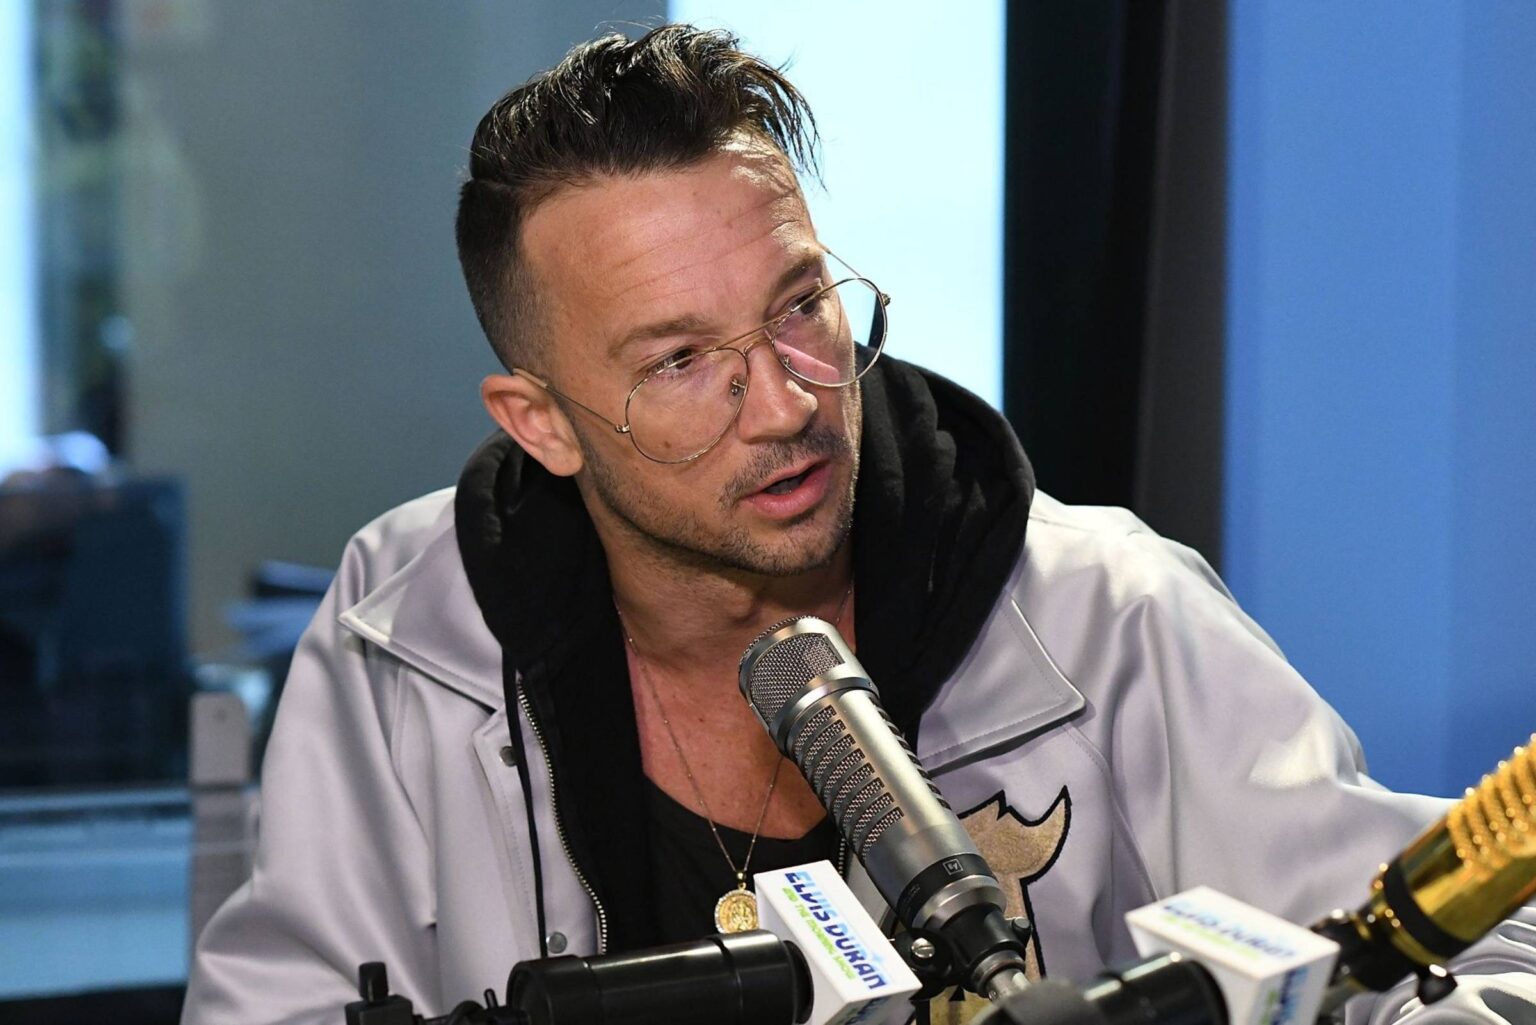 Carl Lentz made a career for himself as a pastor of the Hillsong Church in NYC. Did he have an affair? Let's find out.